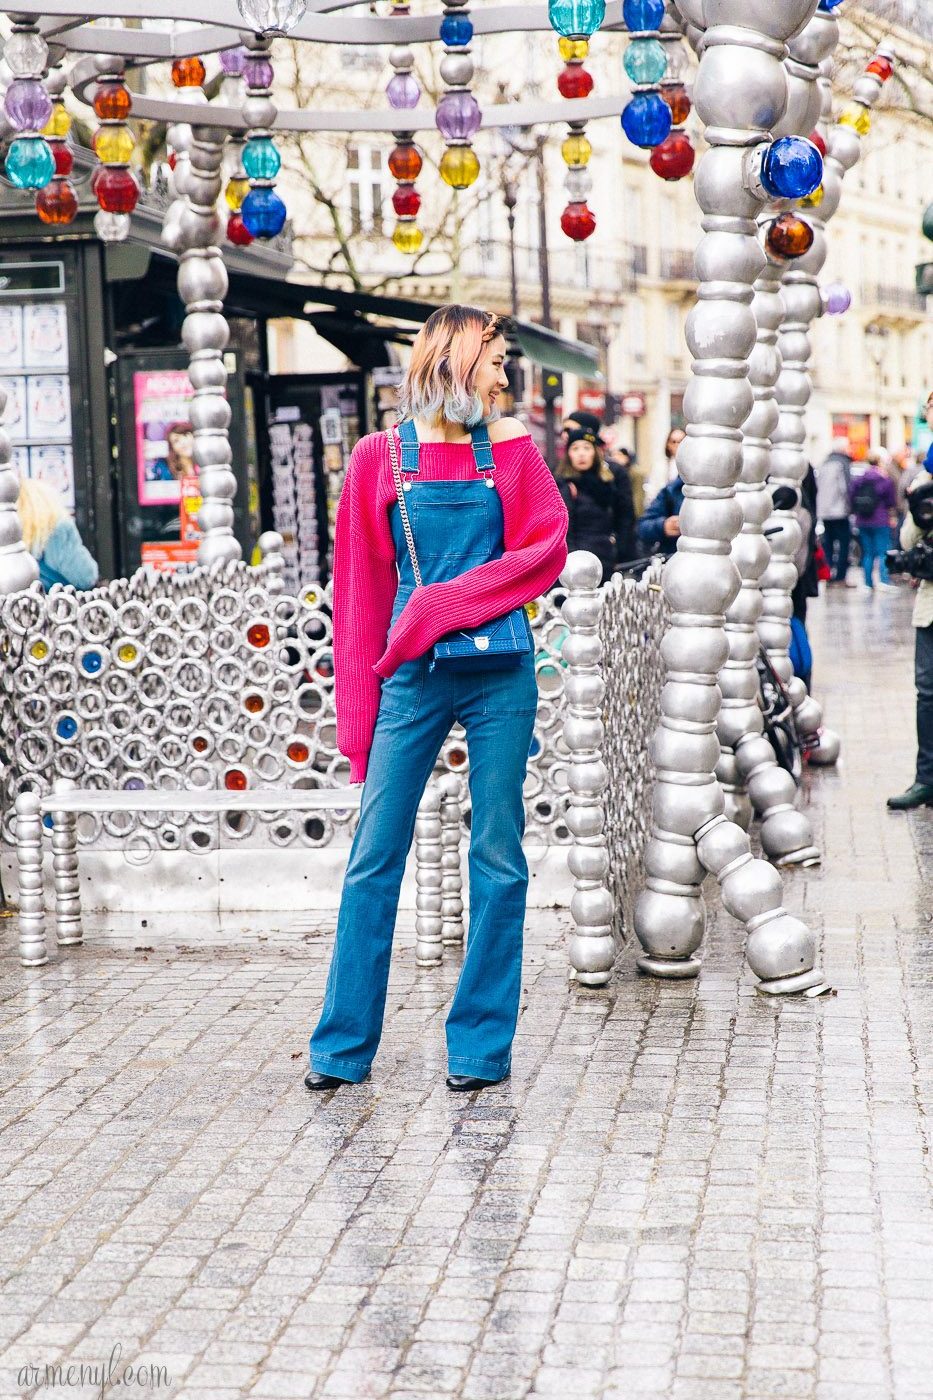 Street style looks from Paris Fashion Week Photographed by Armenyl.com